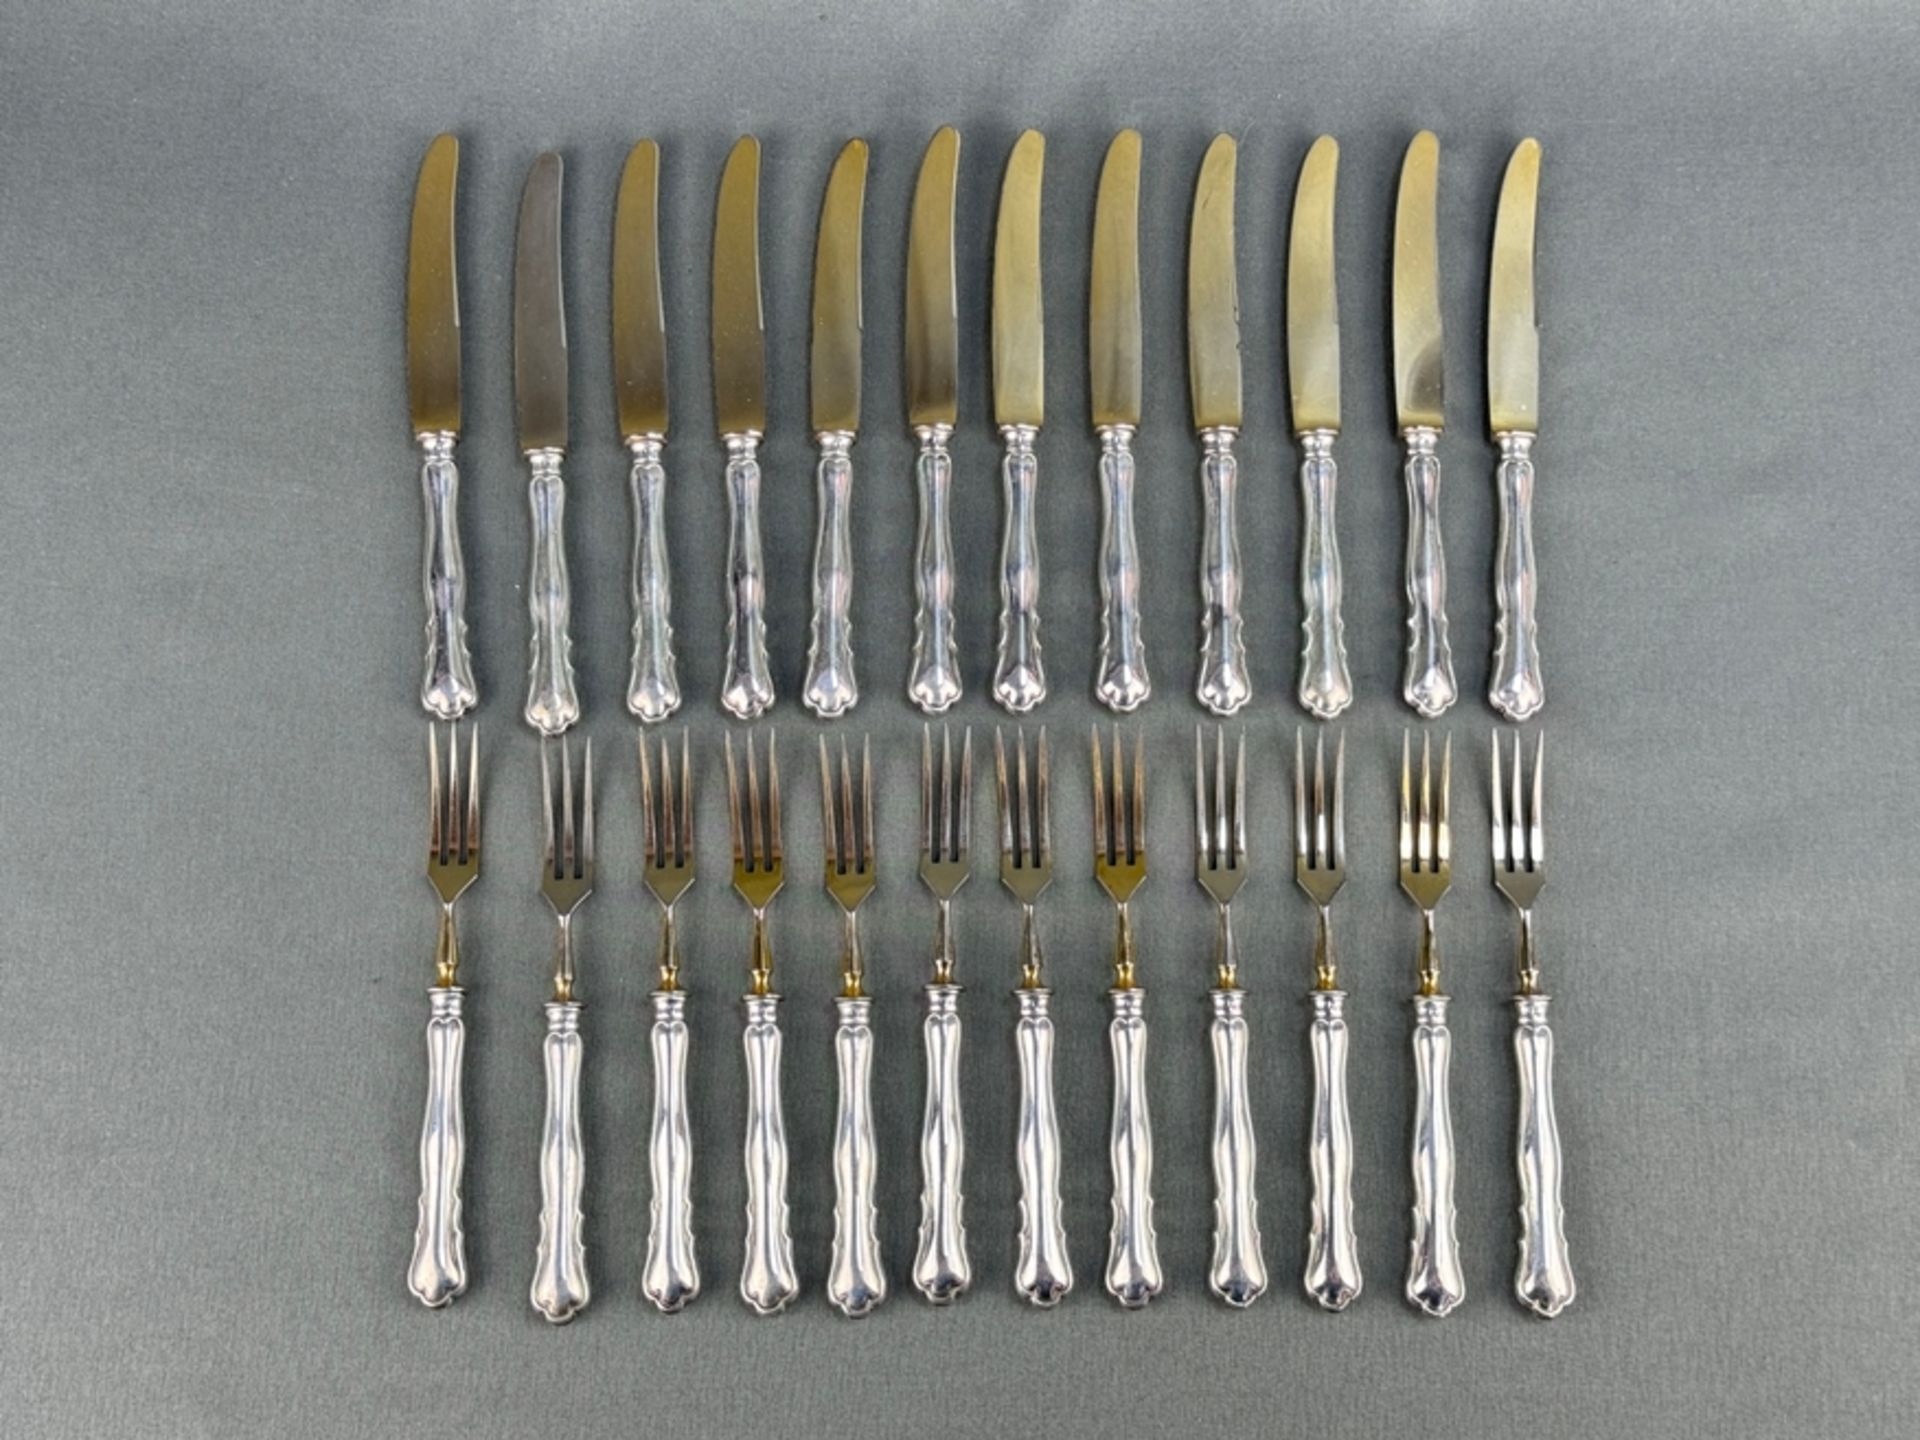 Fruit cutlery, 24-piece, silver 800 (tested), partially gold-plated, 290g without knives, 600g with - Image 4 of 5